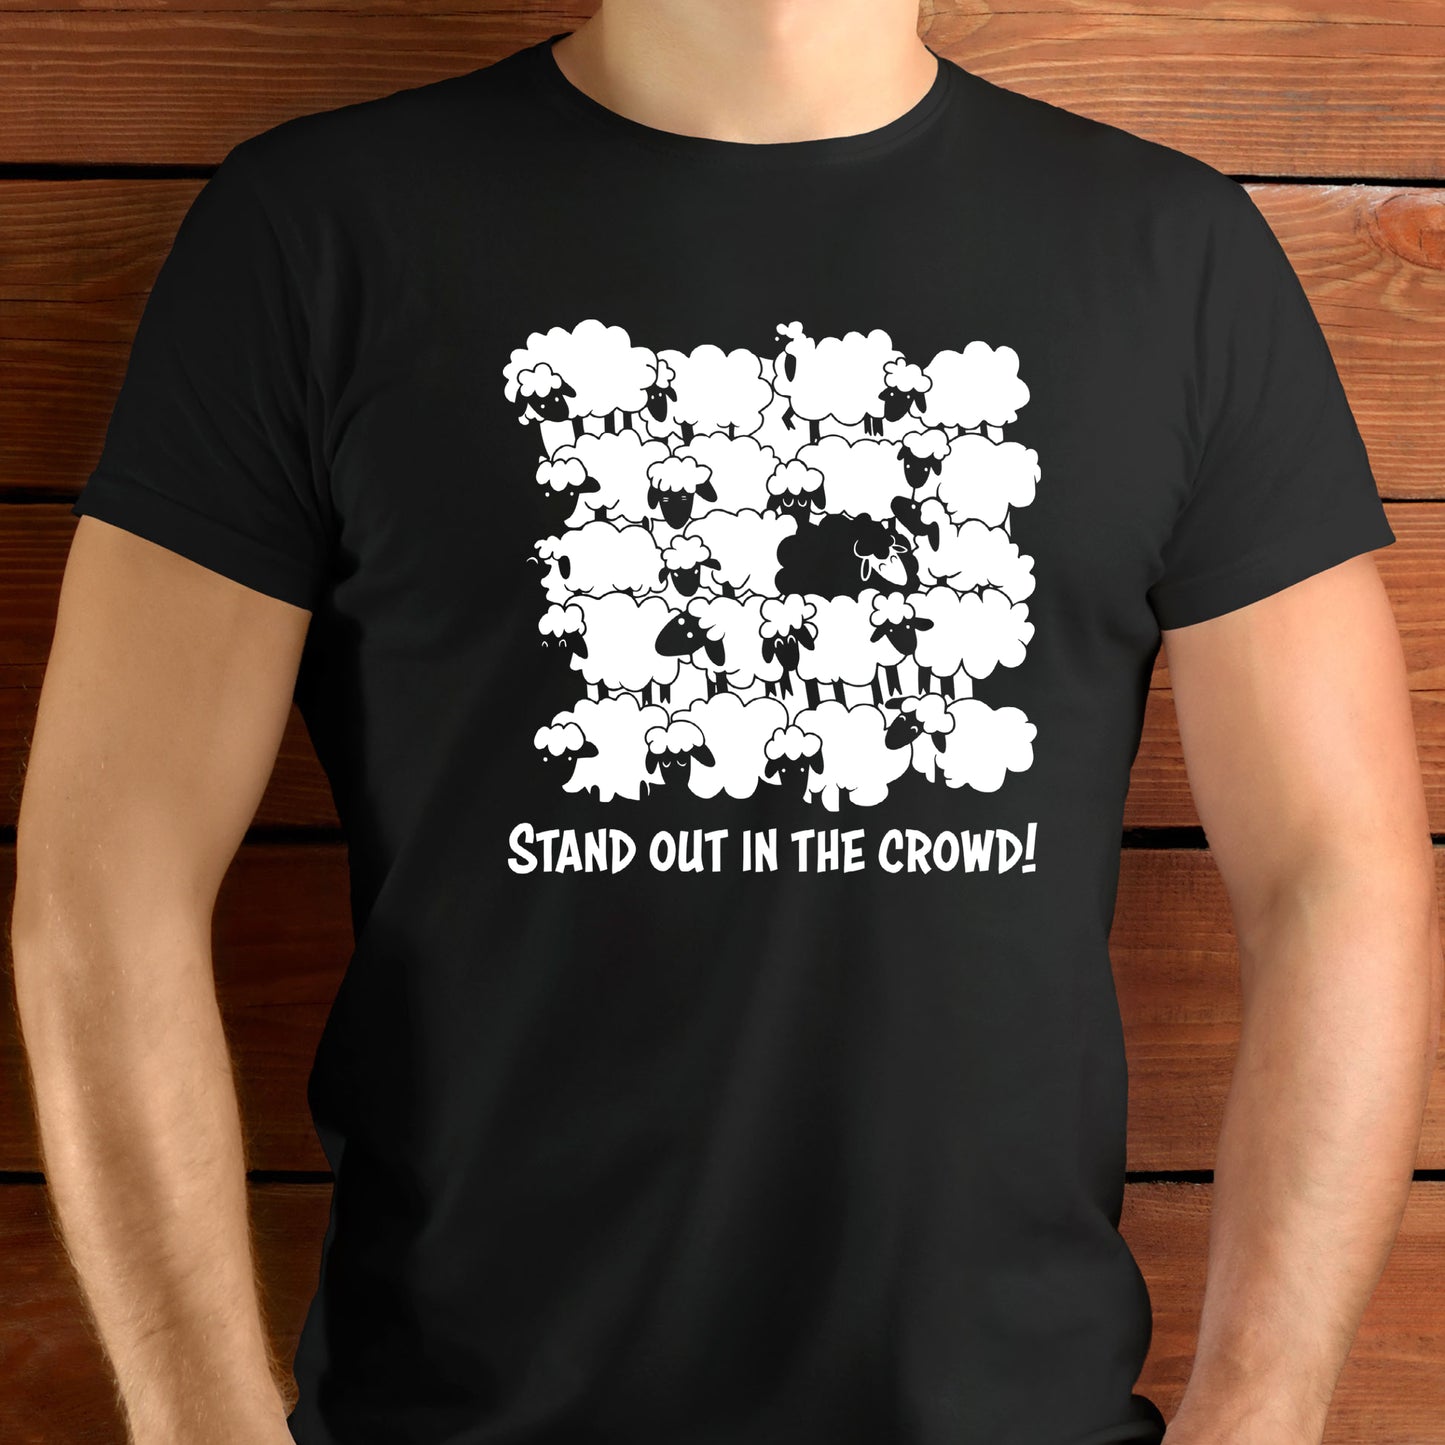 Sheeple T-Shirt For Conservative TShirt Do Not Comply Shirt For Black Sheep Shirt Conspiracy Theory T Shirt For Awake Patriot Wake Up Tee